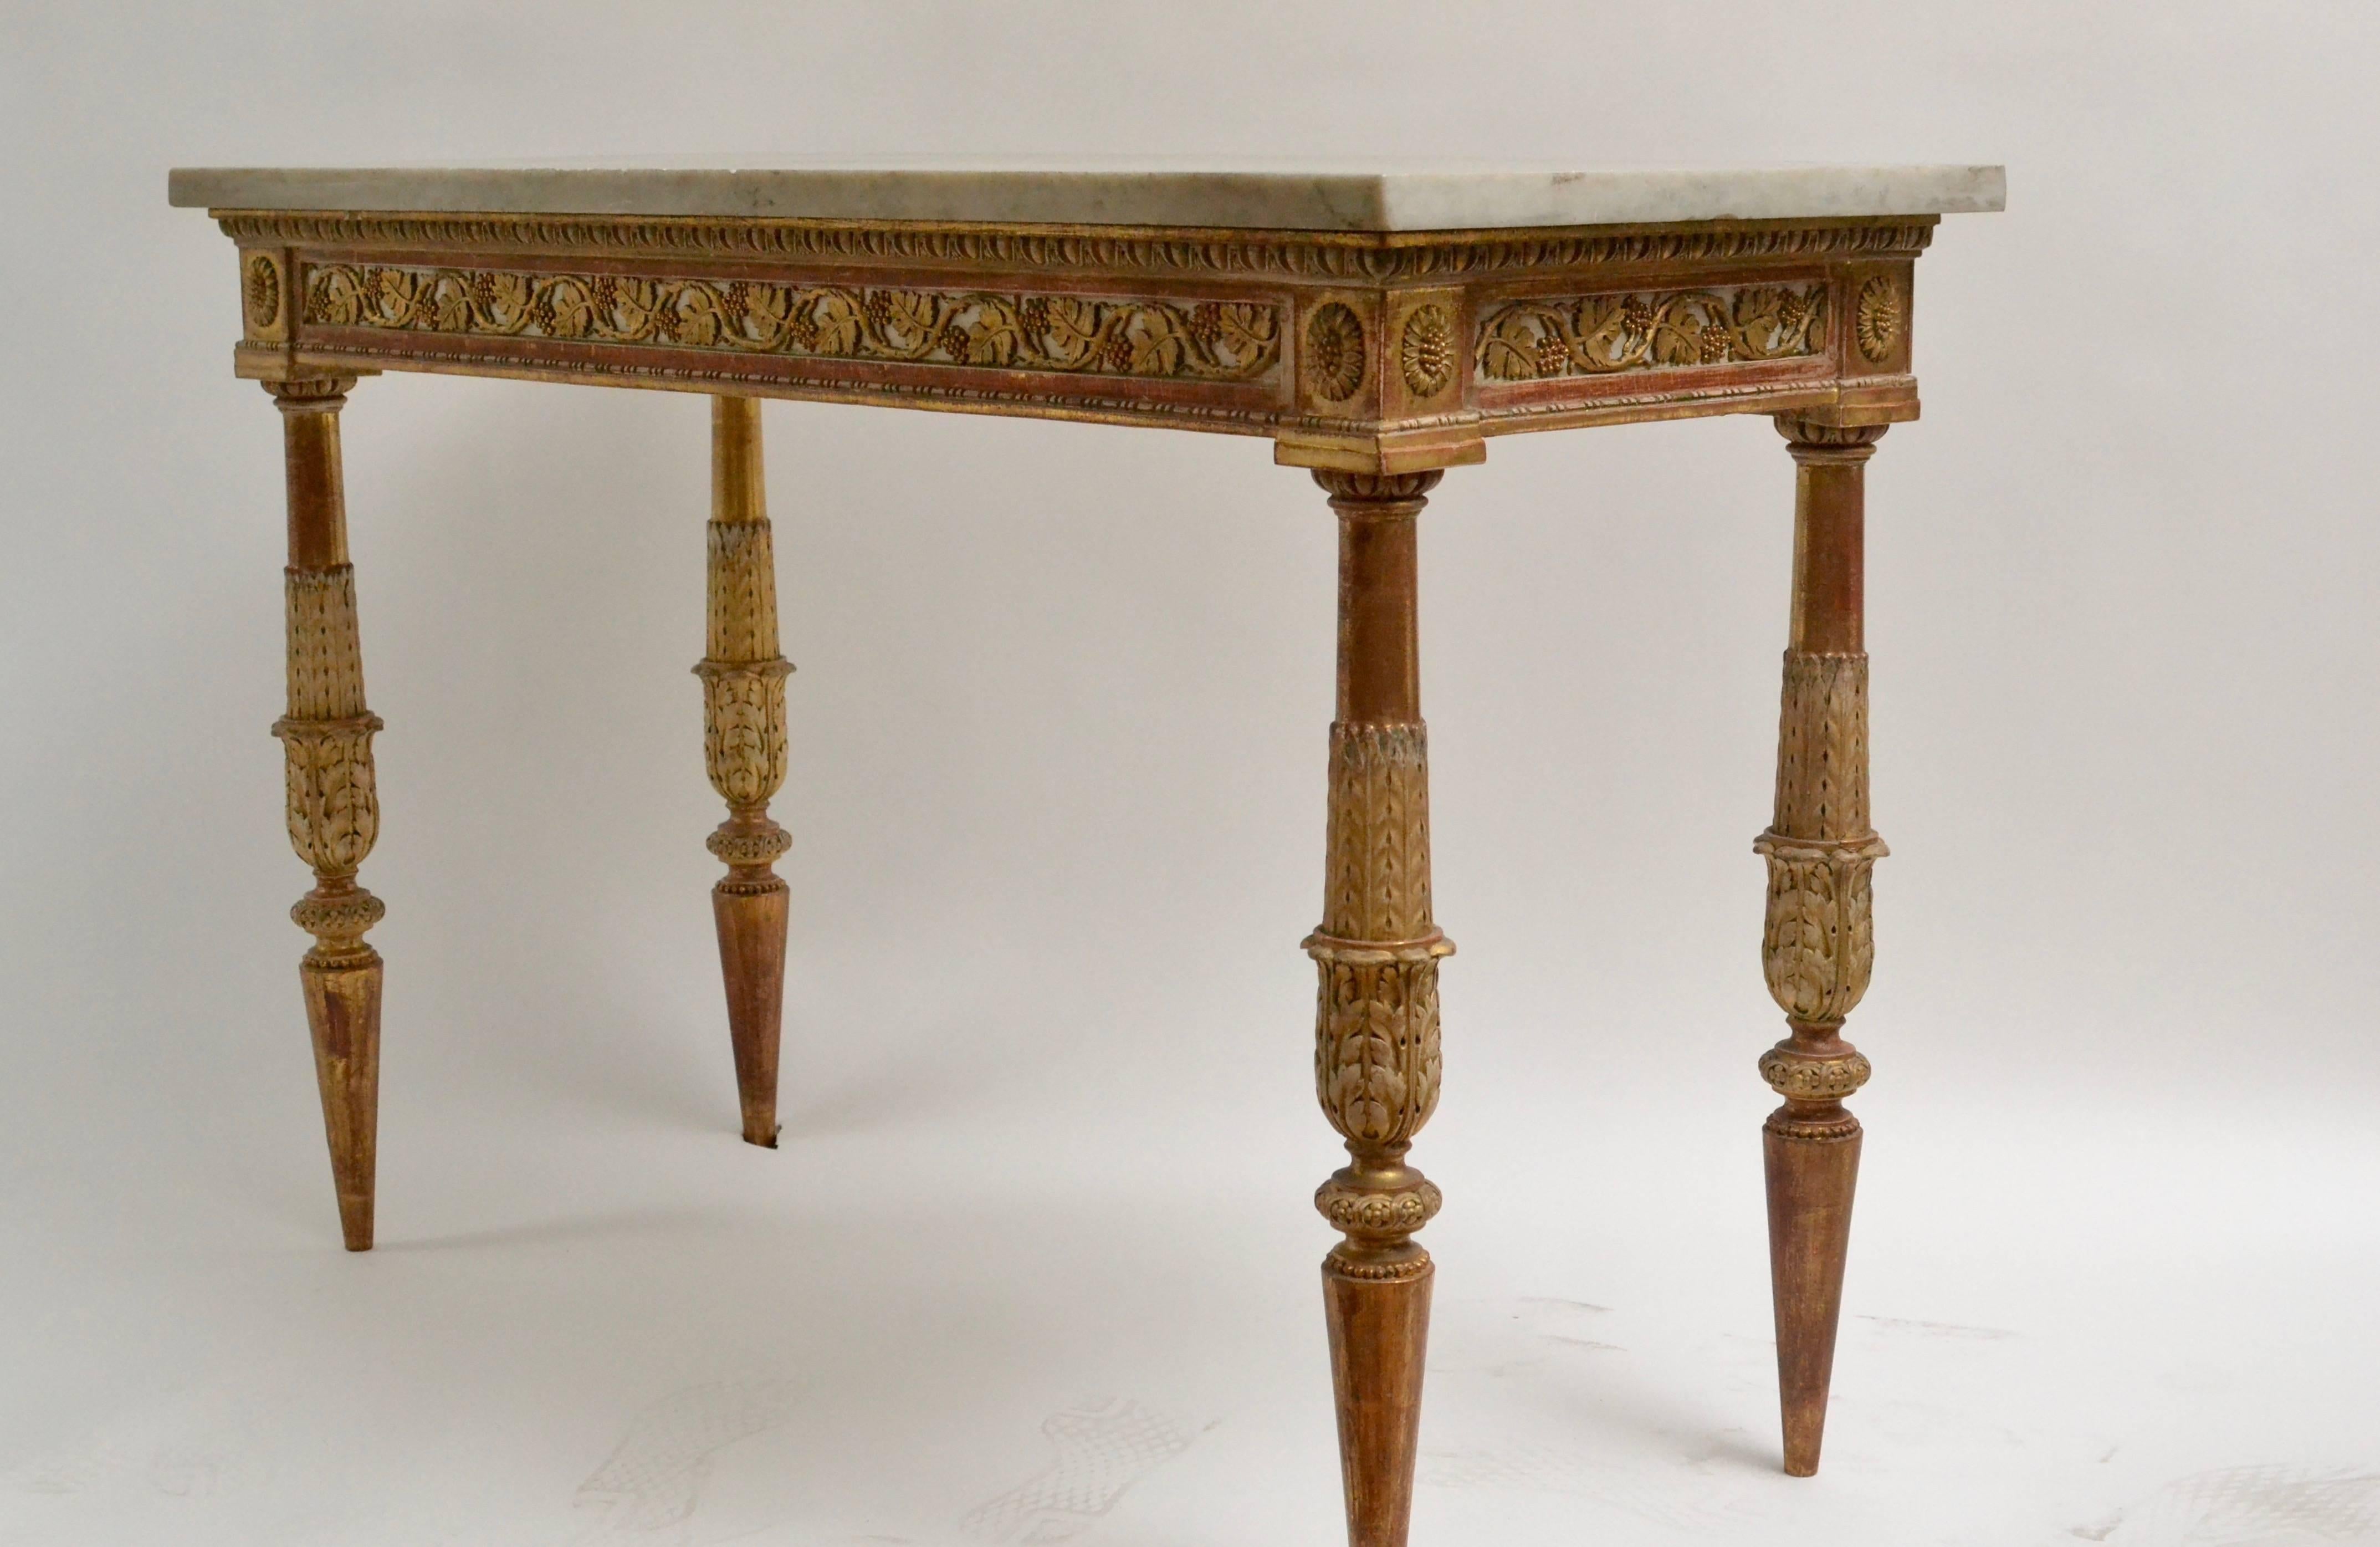 An important Gustavian carved giltwood console table with a marble top by Jean Baptiste Masreliez (1753-1801). After drawings by his brother the royal interior decorator Louis Masreliez (1748-1810). The detailing to carving and gilding is